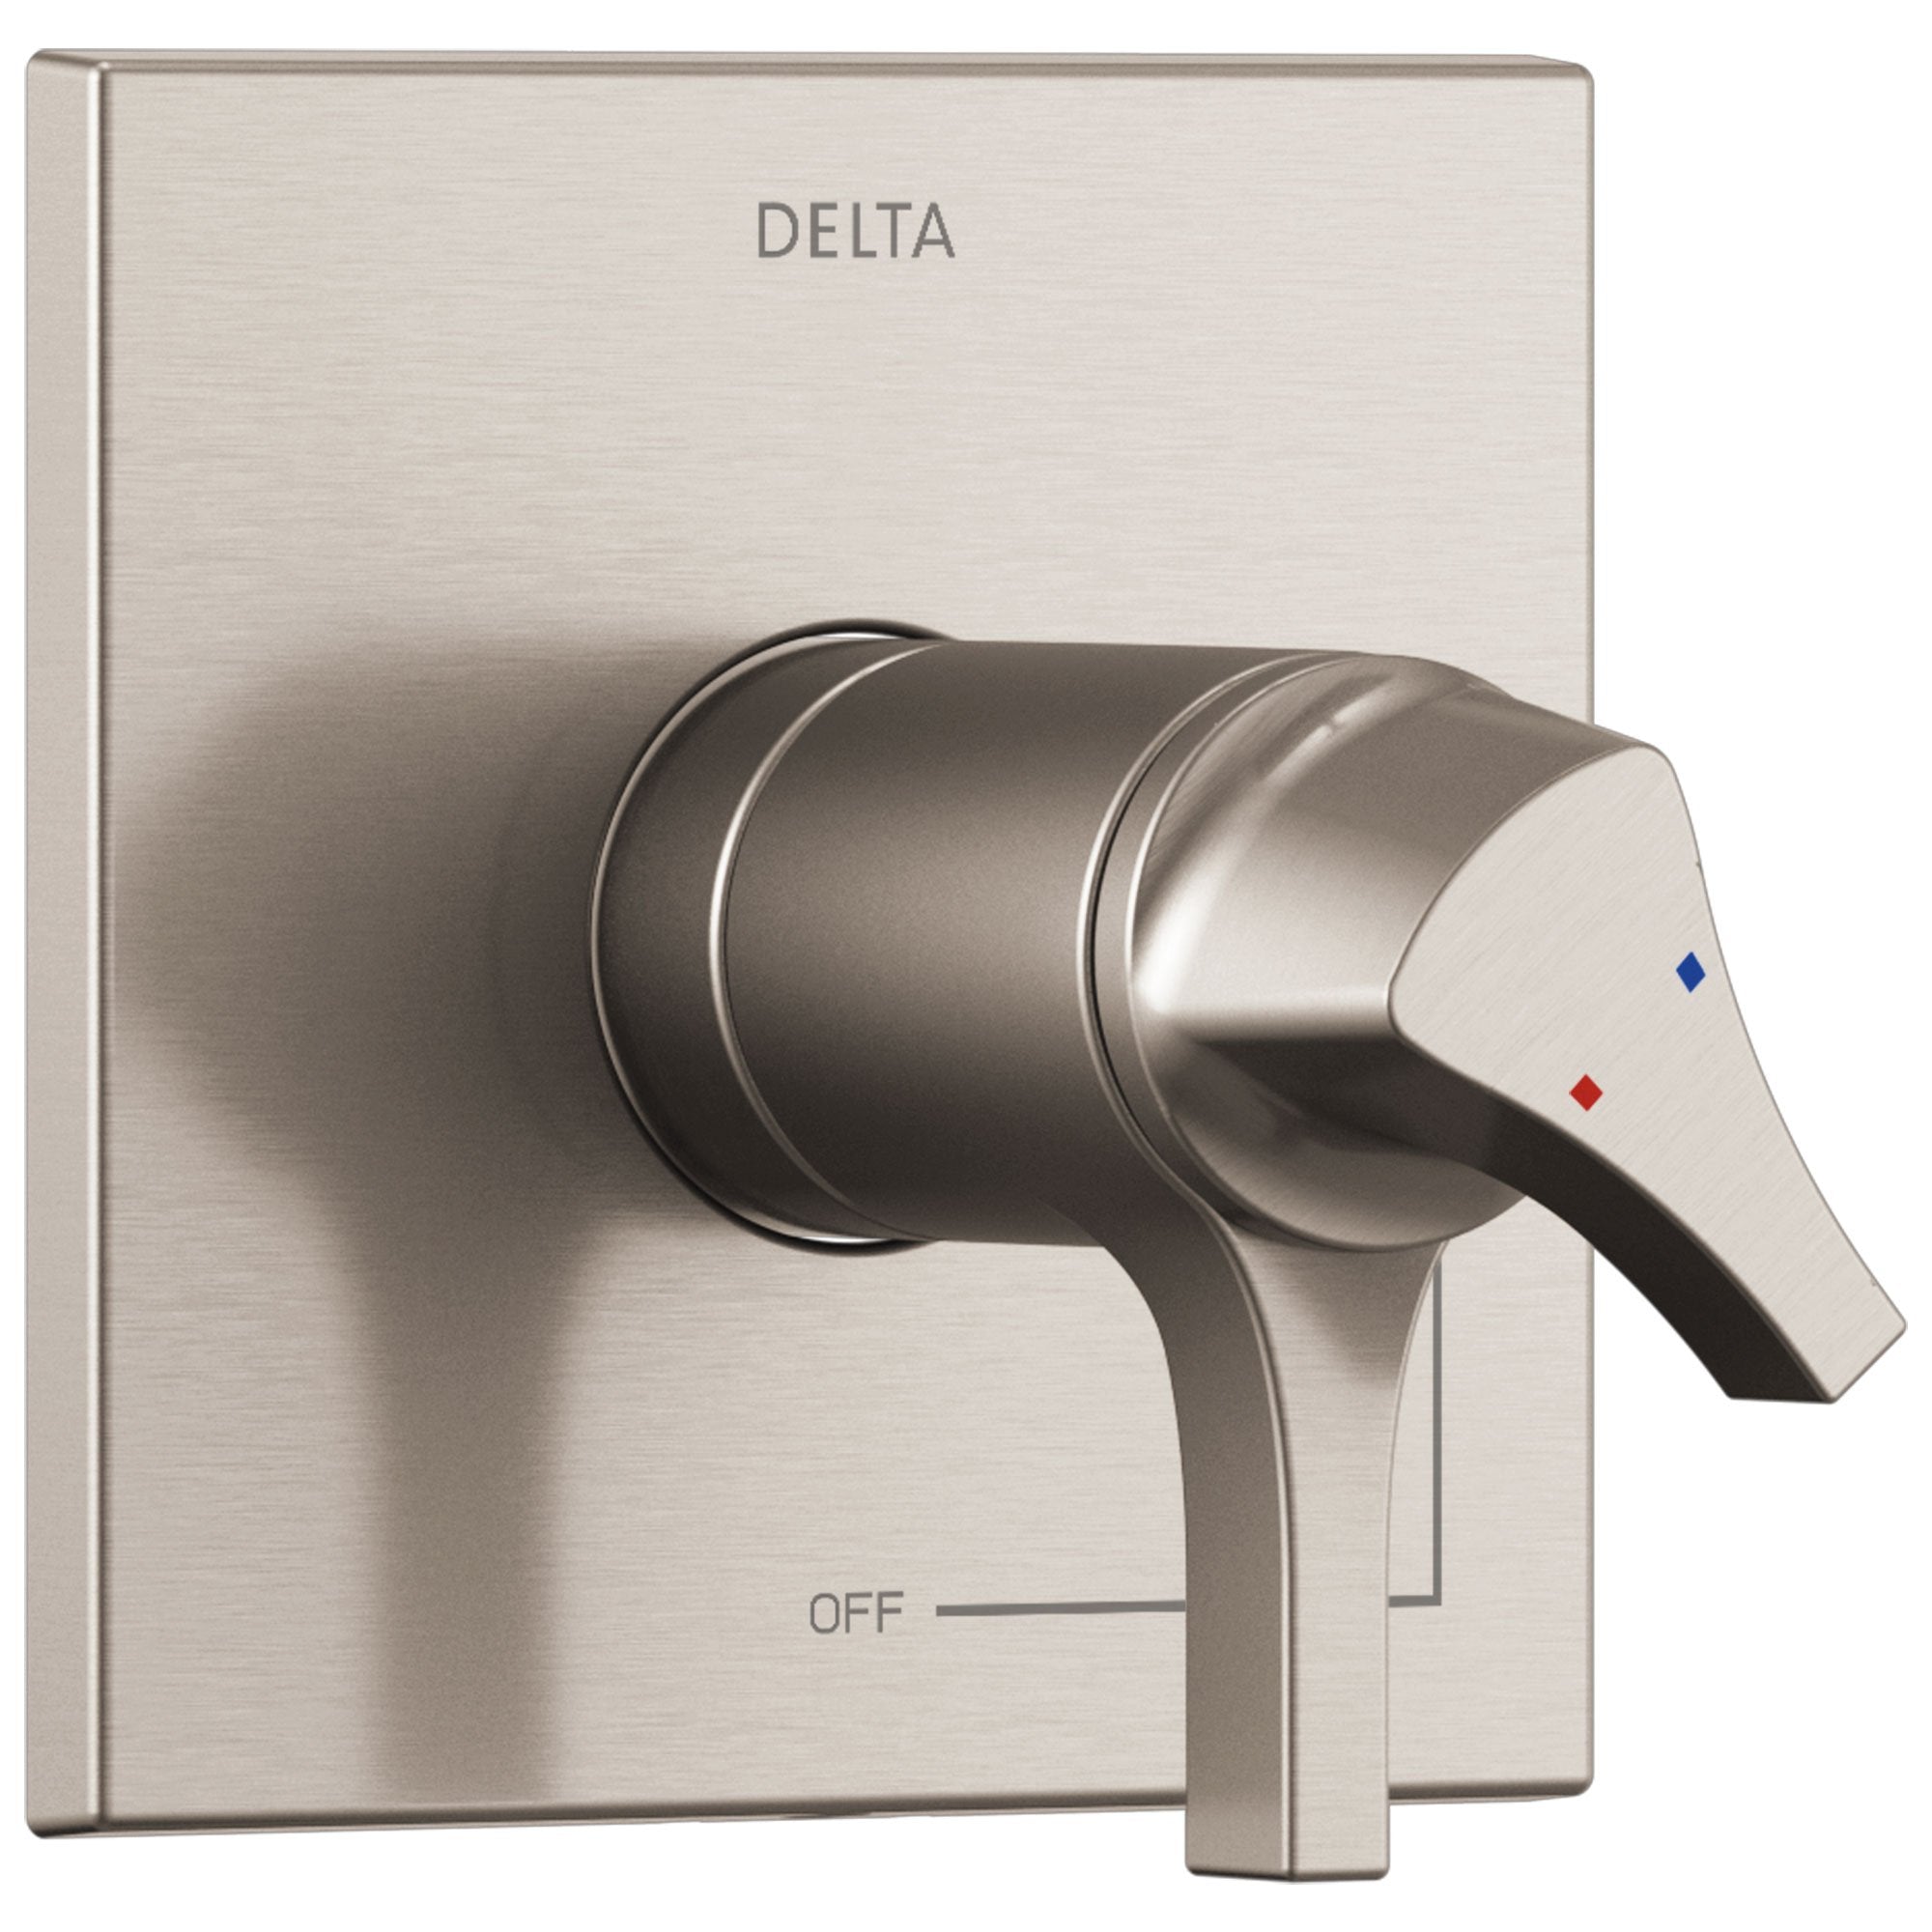 Delta Zura Collection Stainless Steel Finish TempAssure 17T Dual Temperature and Pressure Shower Faucet Control Handle Includes Rough-in Valve with Stops D1943V